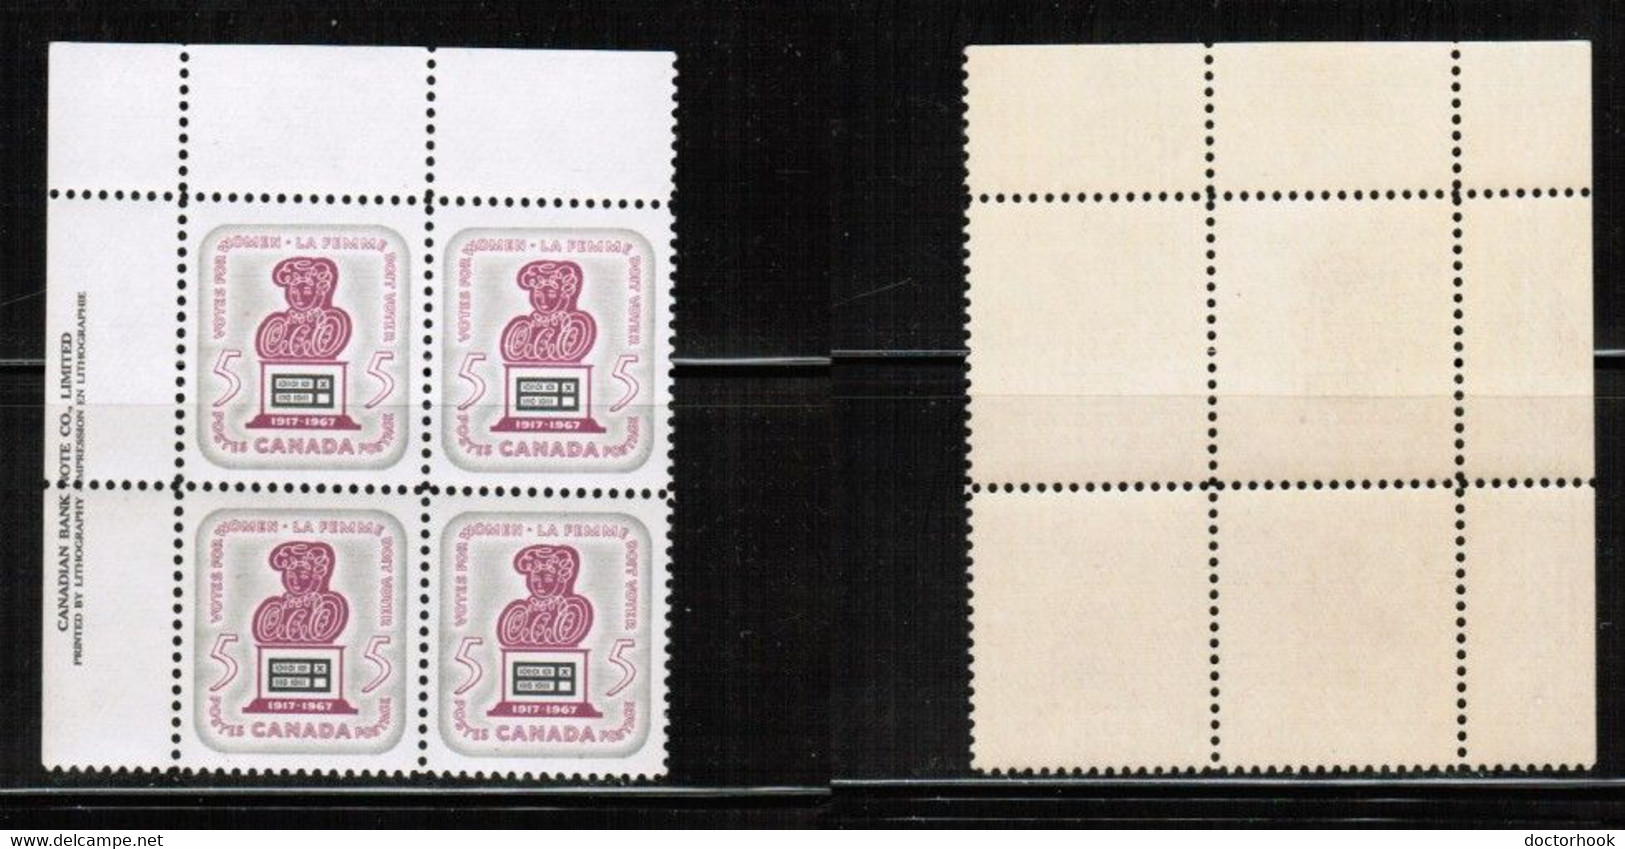 CANADA   Scott # 470** MINT NH INSCRIPTION BLOCK Of 4 CONDITION AS PER SCAN (LG-1456) - Num. Planches & Inscriptions Marge